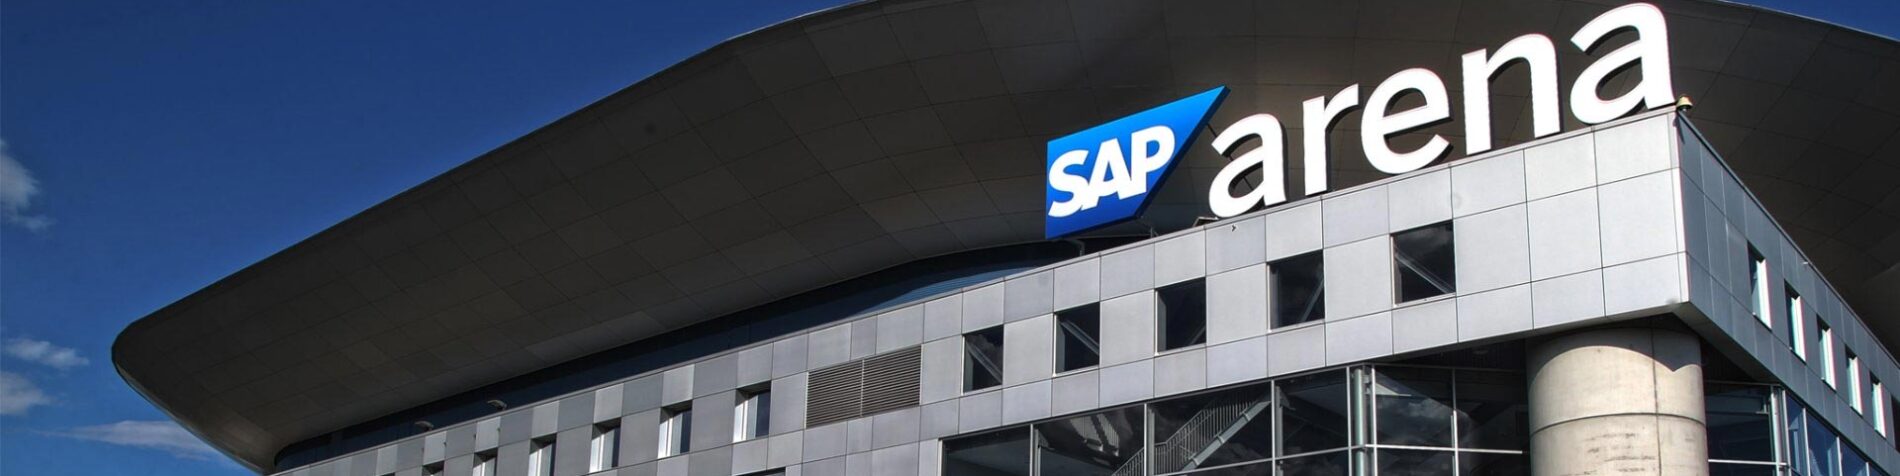 SAP Annual General Meeting of Shareholders Approves All Agenda Items